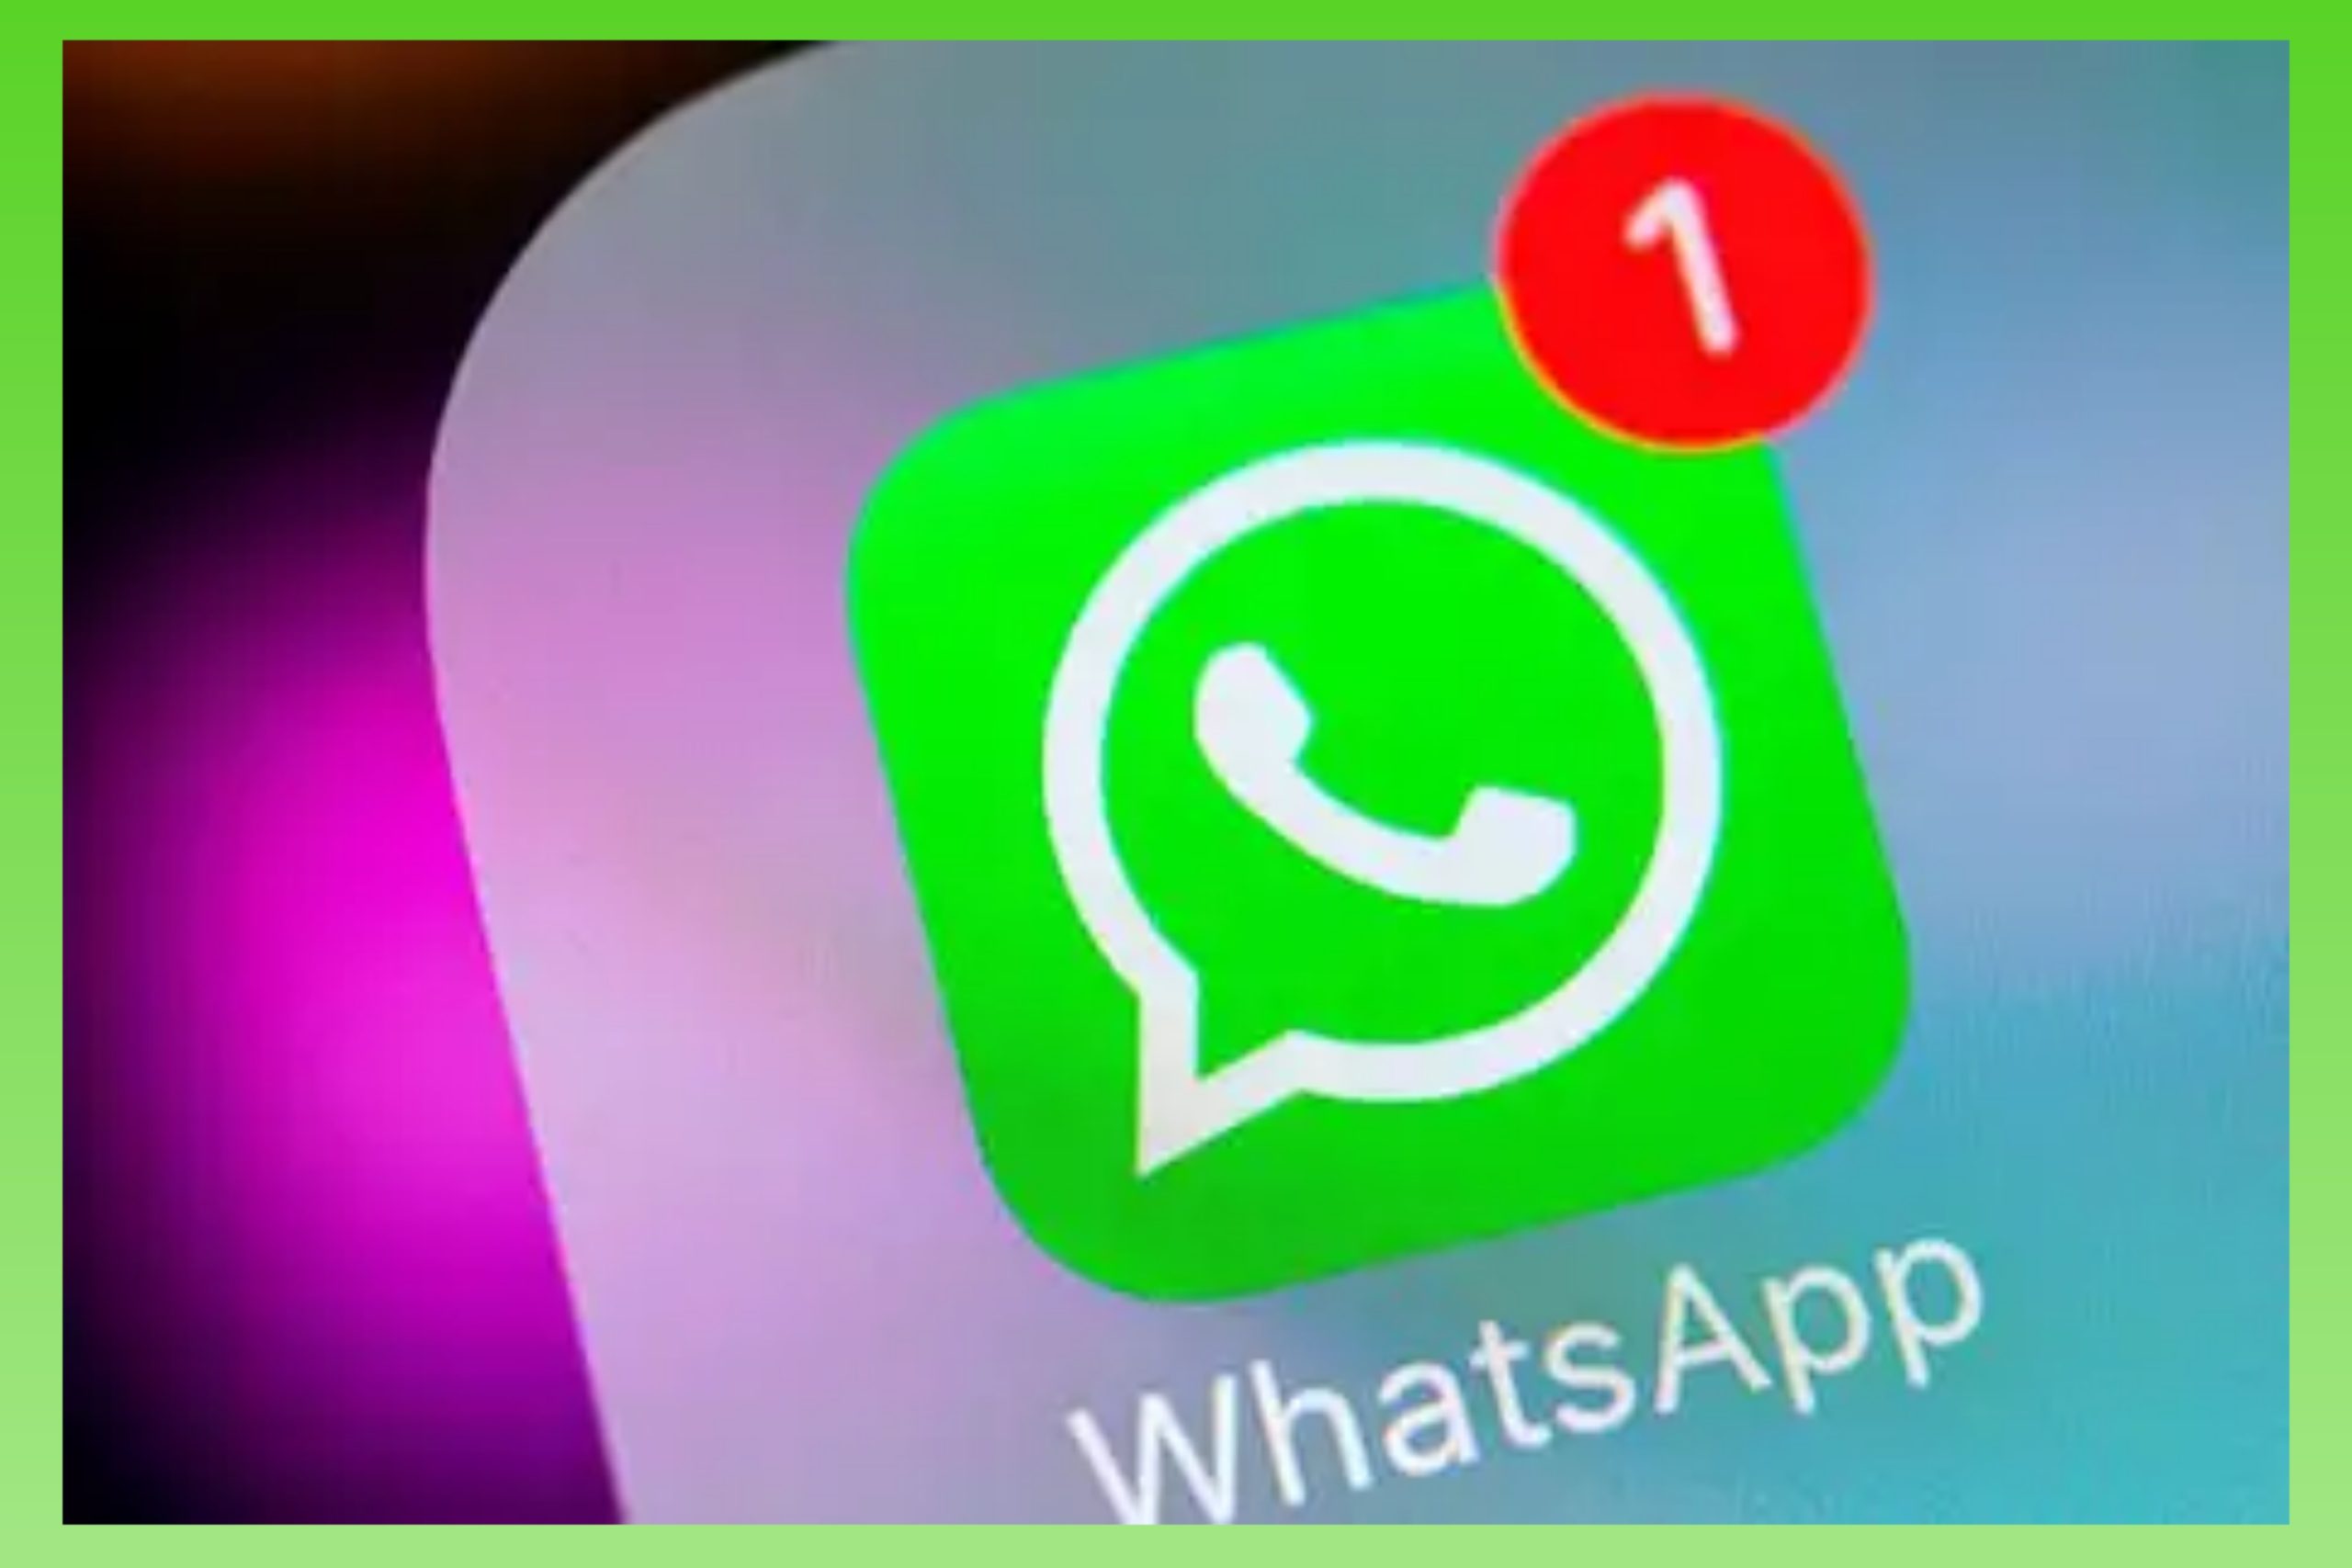 Government warns, don't click this link on Whatsapp sms by mistake